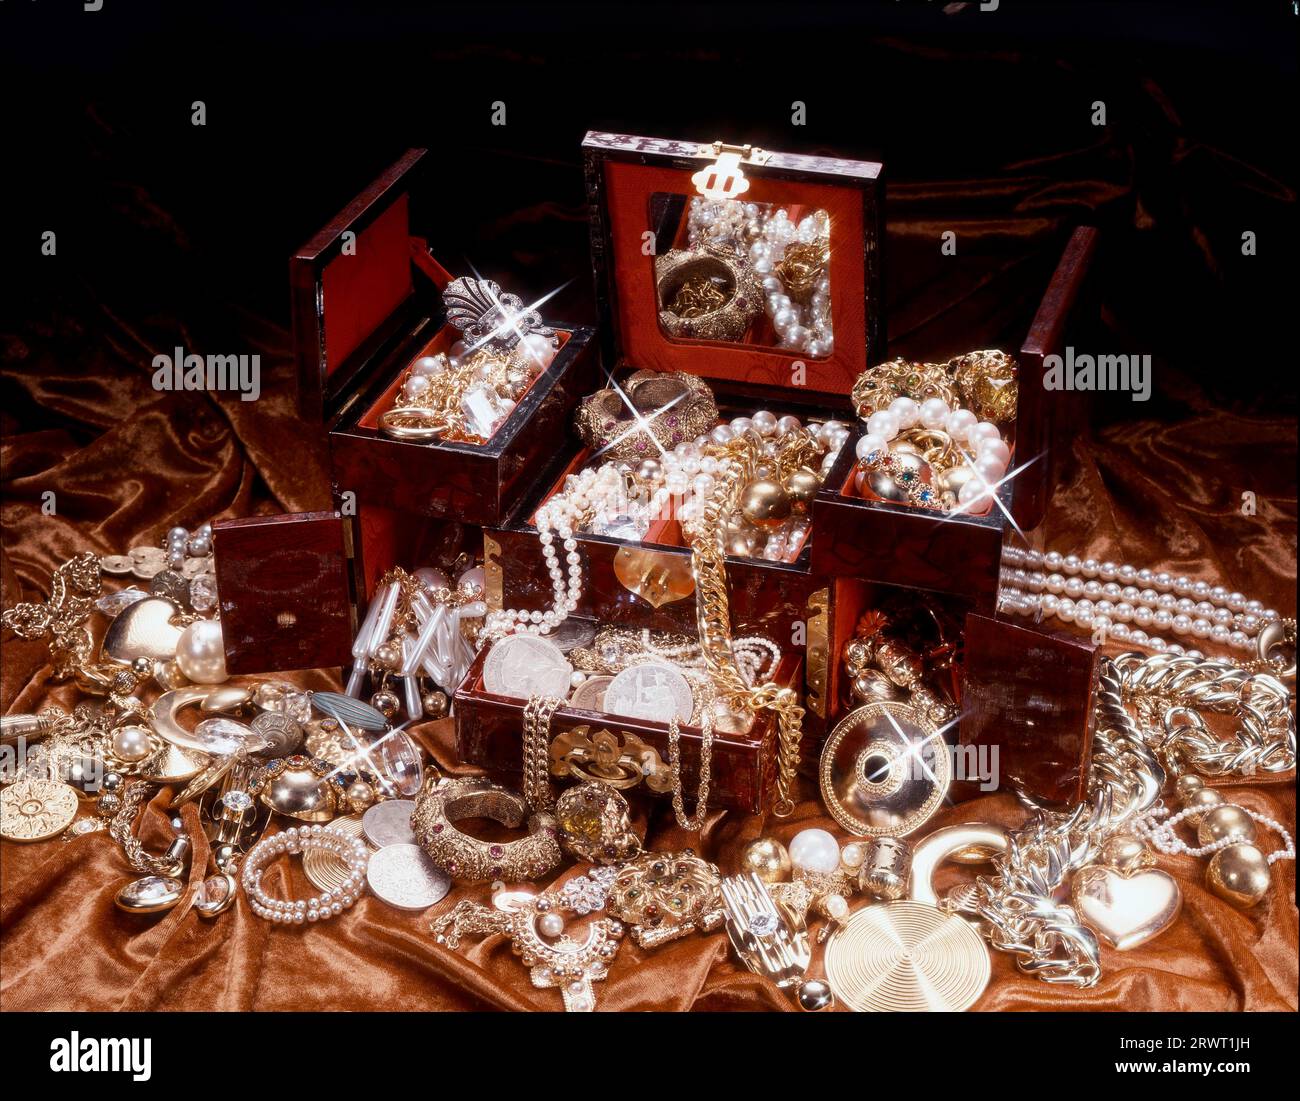 Treasure chest with lots of jewellery Stock Photo